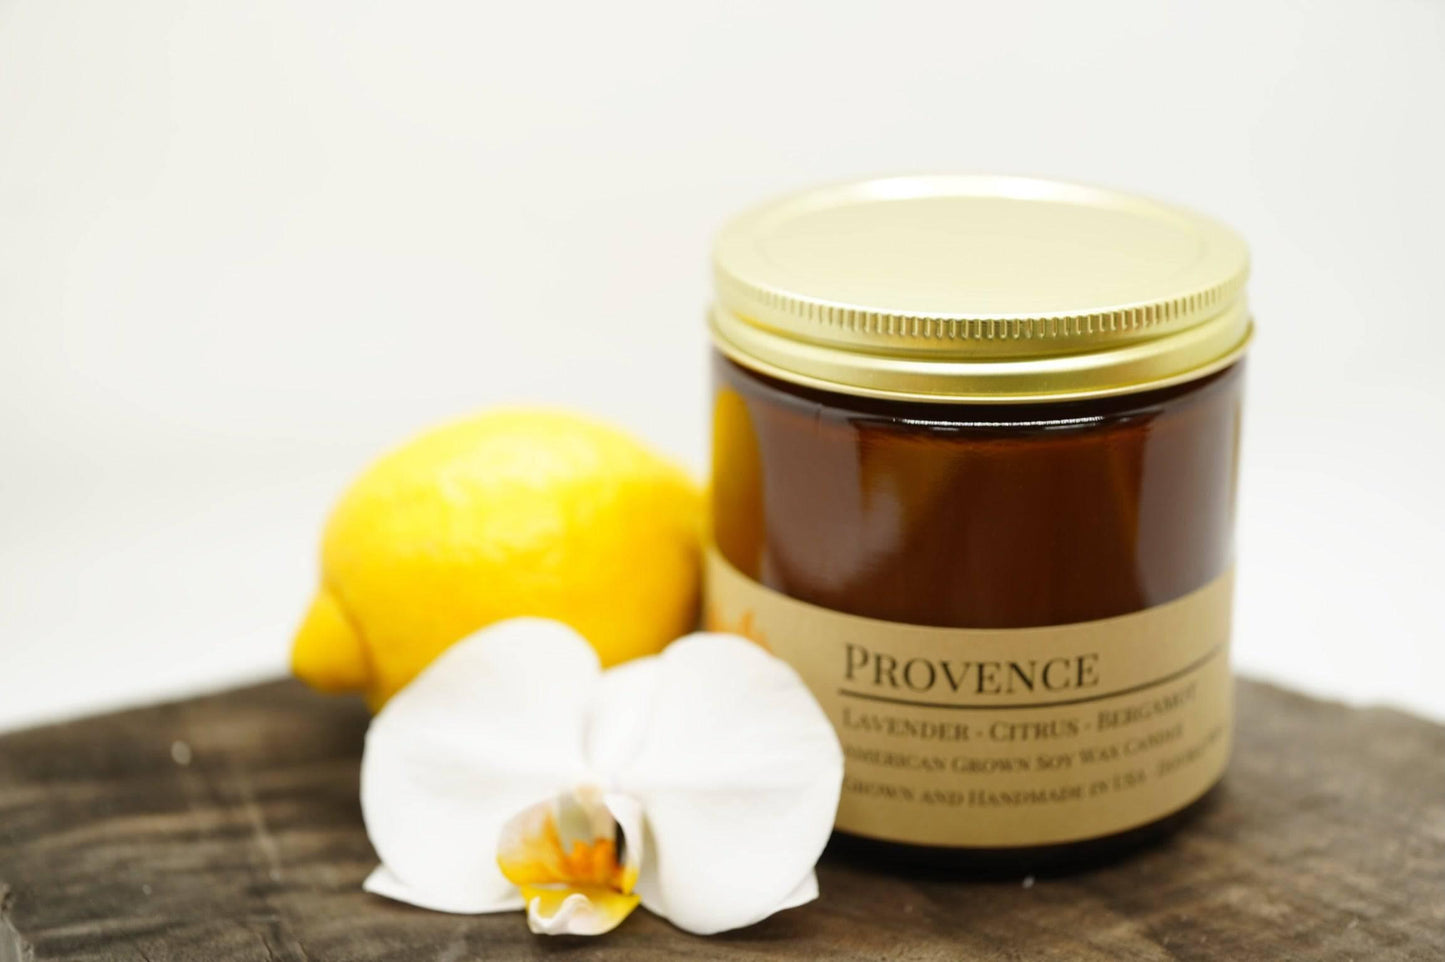 Provence (Lavender) Soy Wax Candle | 16 oz Double Wick Amber Apothecary Jar - Prairie Fire Candles